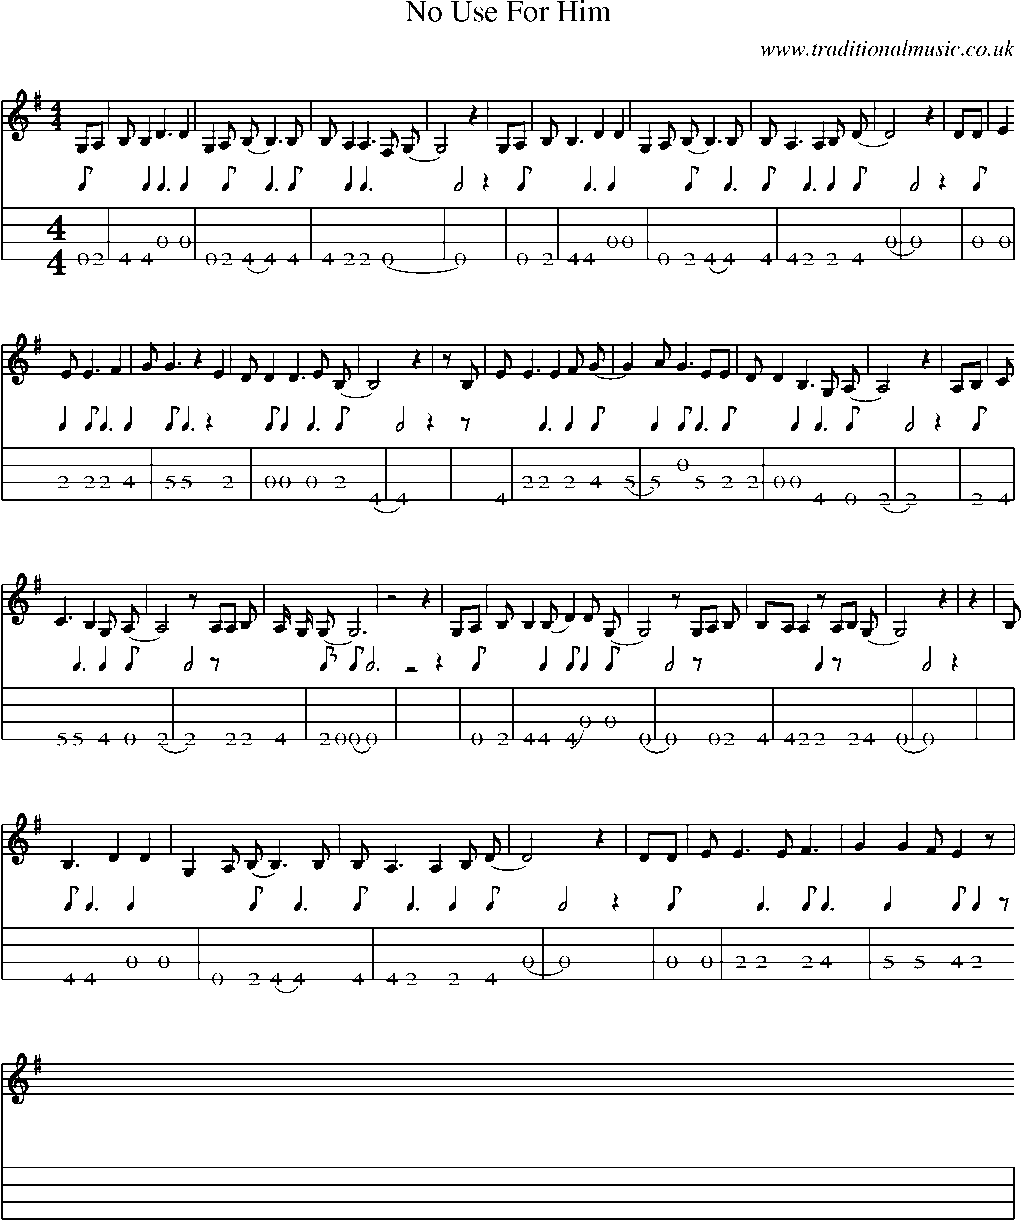 Mandolin Tab and Sheet Music for No Use For Him(1)